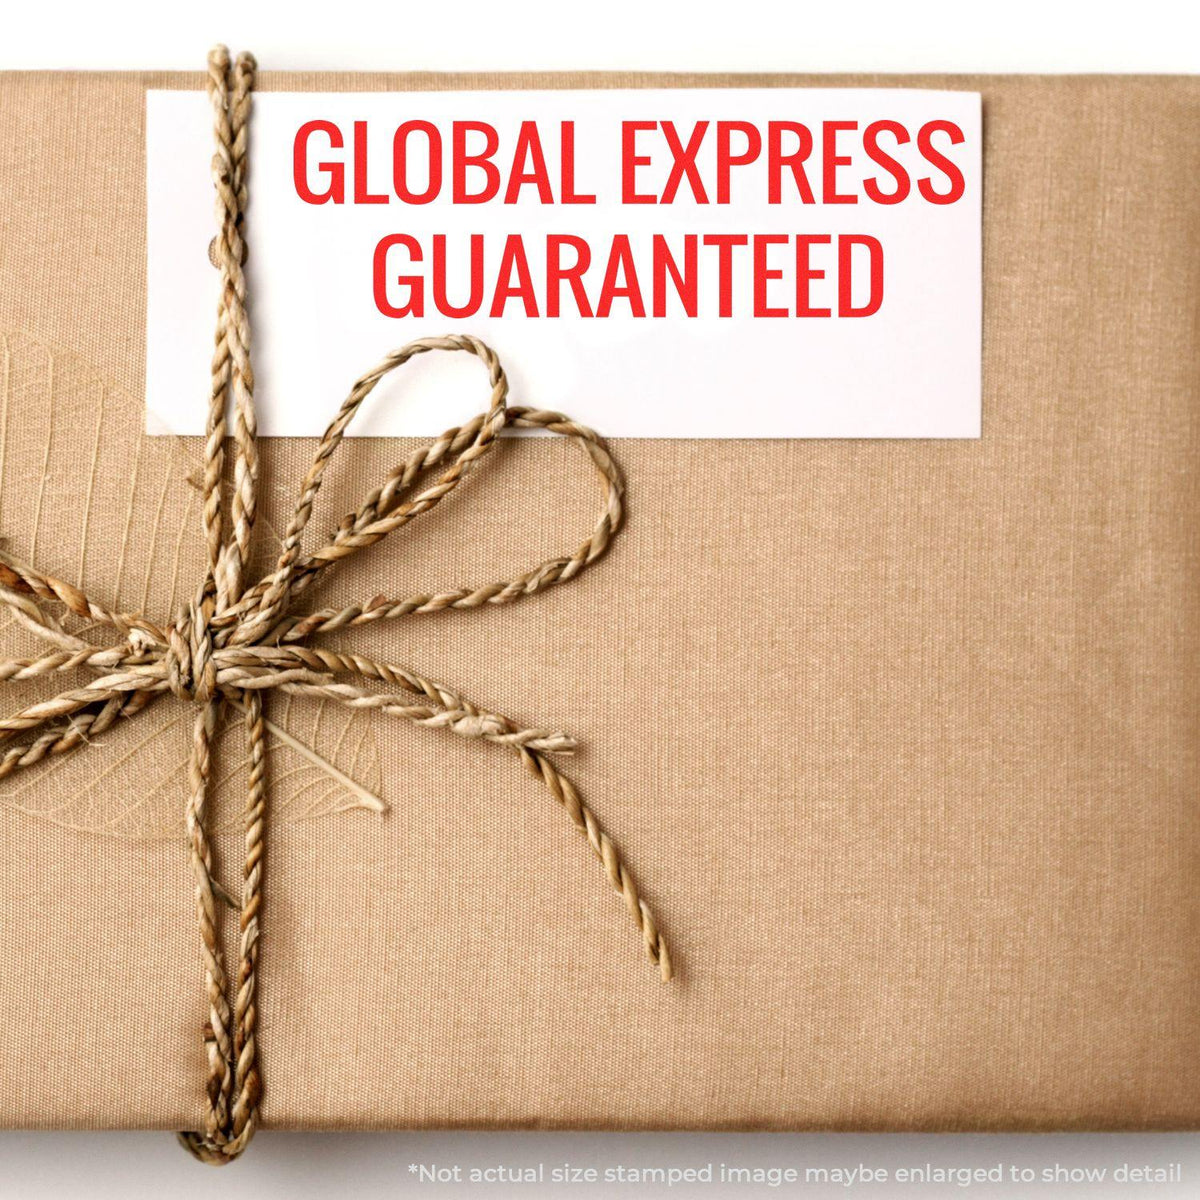 In Use Large Pre-Inked Global Express Guaranteed Stamp Image